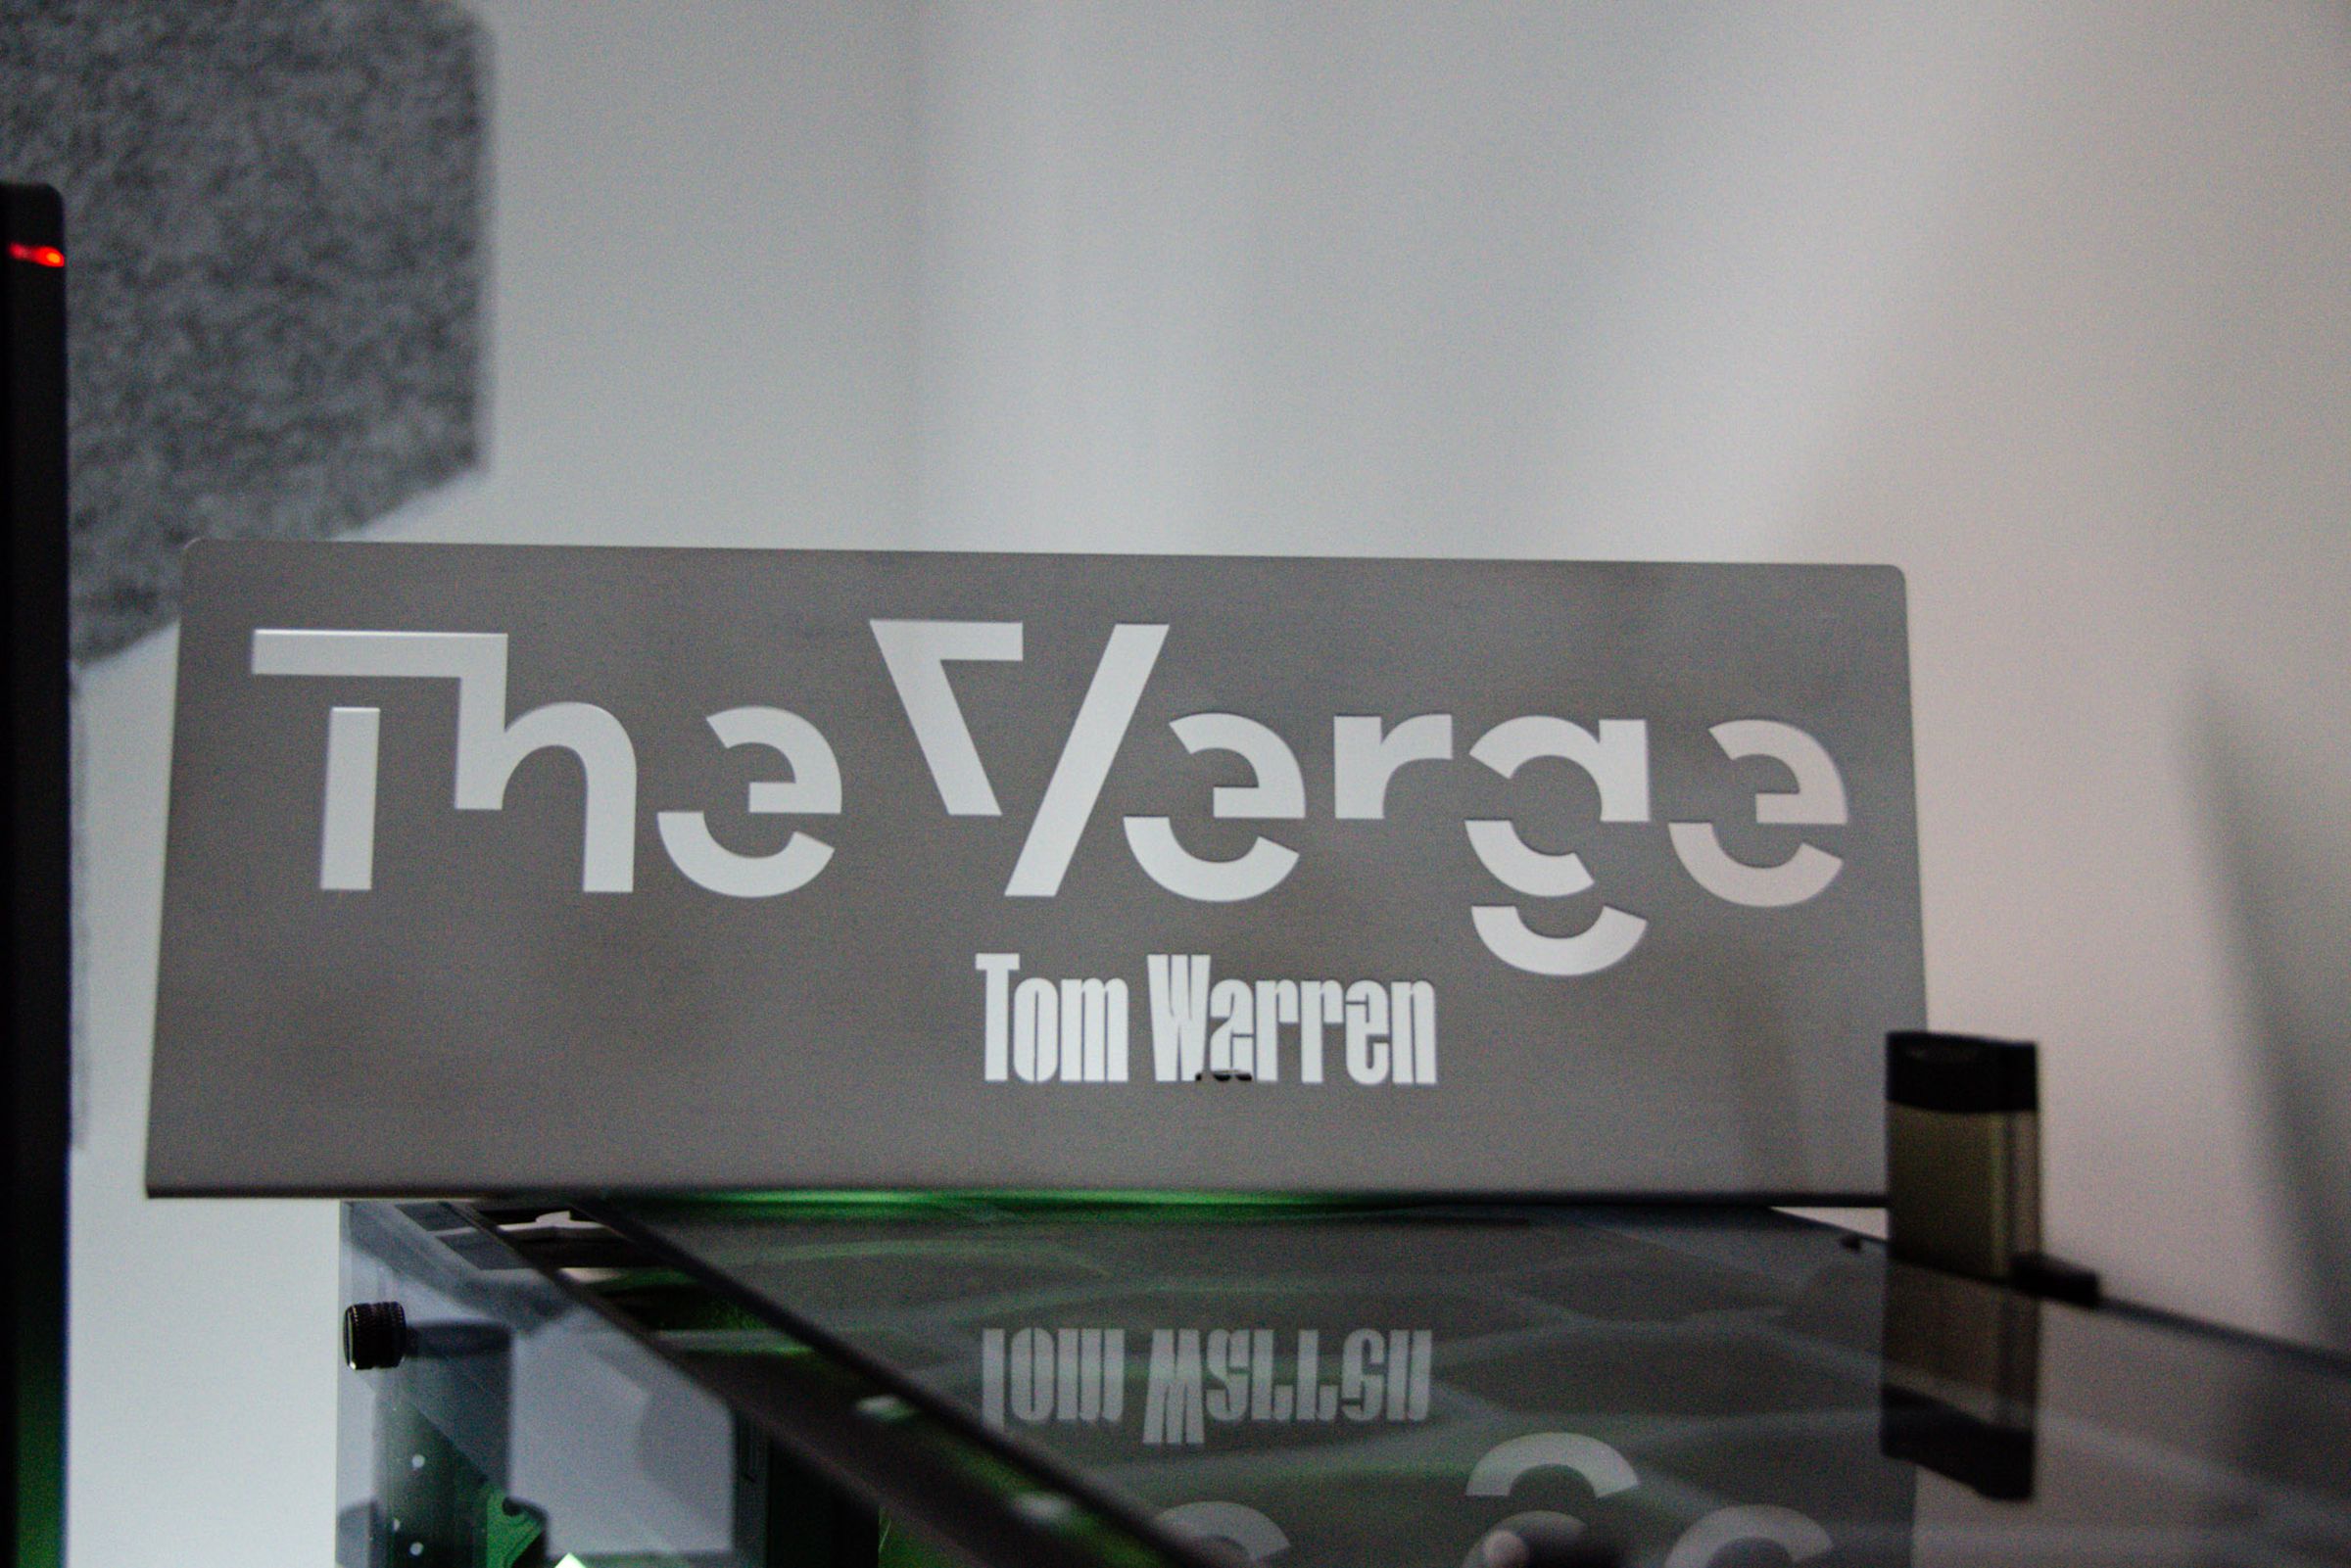 A sign says “The Verge” and underneath “Tom Warren.”